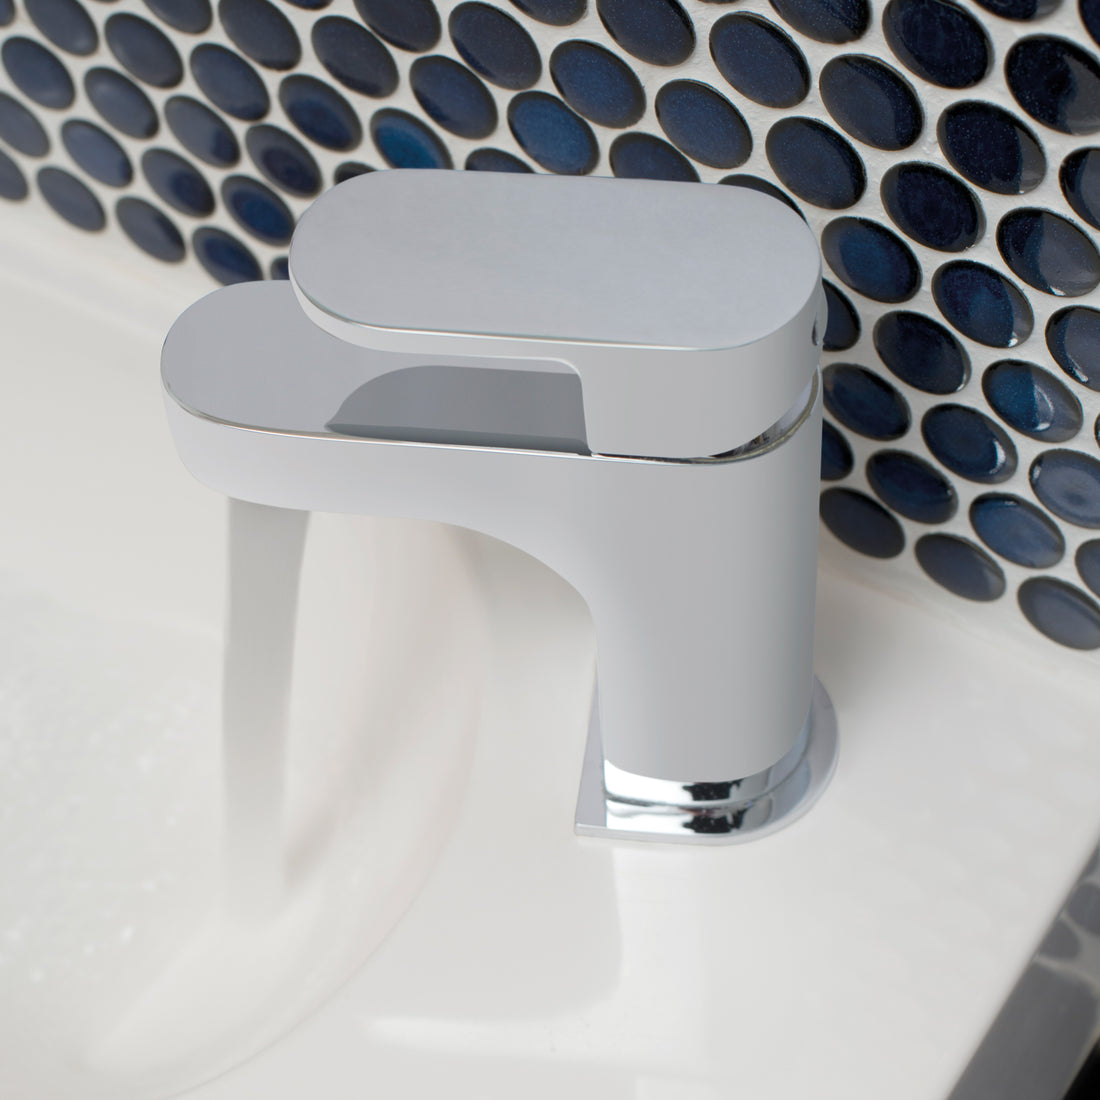 Vado Life Mini Mono Basin Mixer Single Lever Deck Mounted Smooth Bodied with Universal Waste